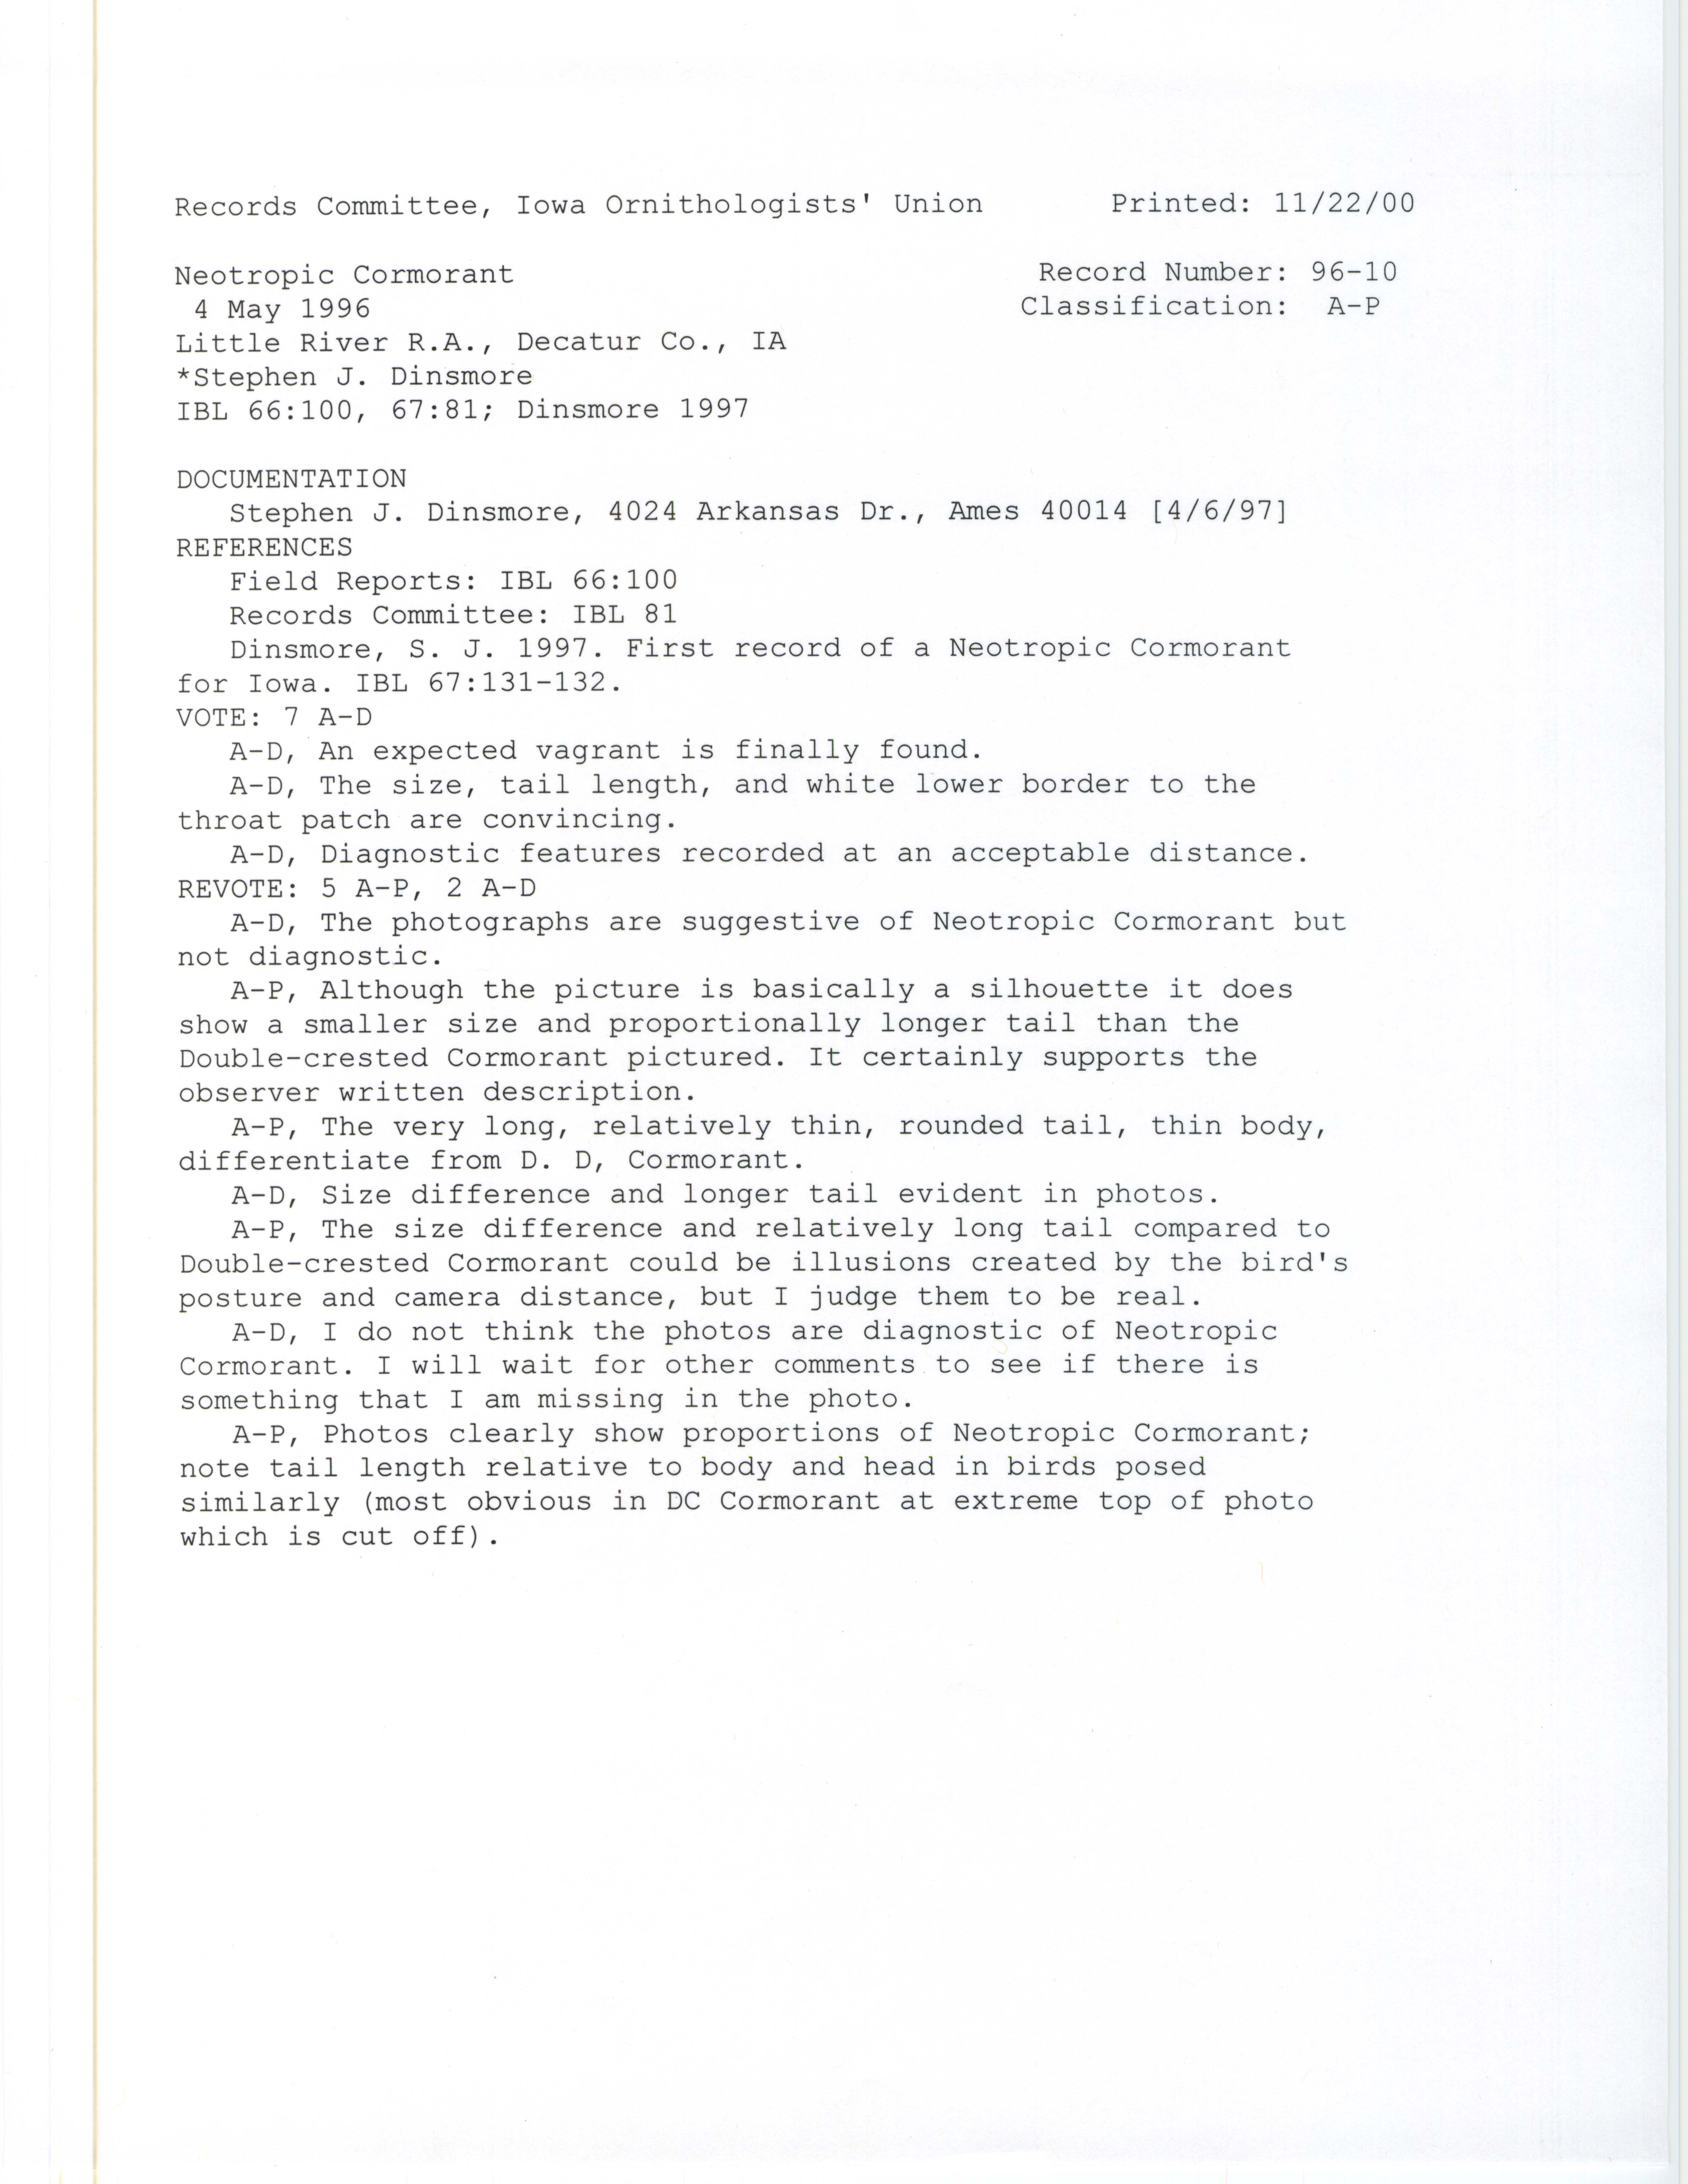 Records Committee review for rare bird sighting of Neotropic Cormorant at Little River Recreation Area, 1996